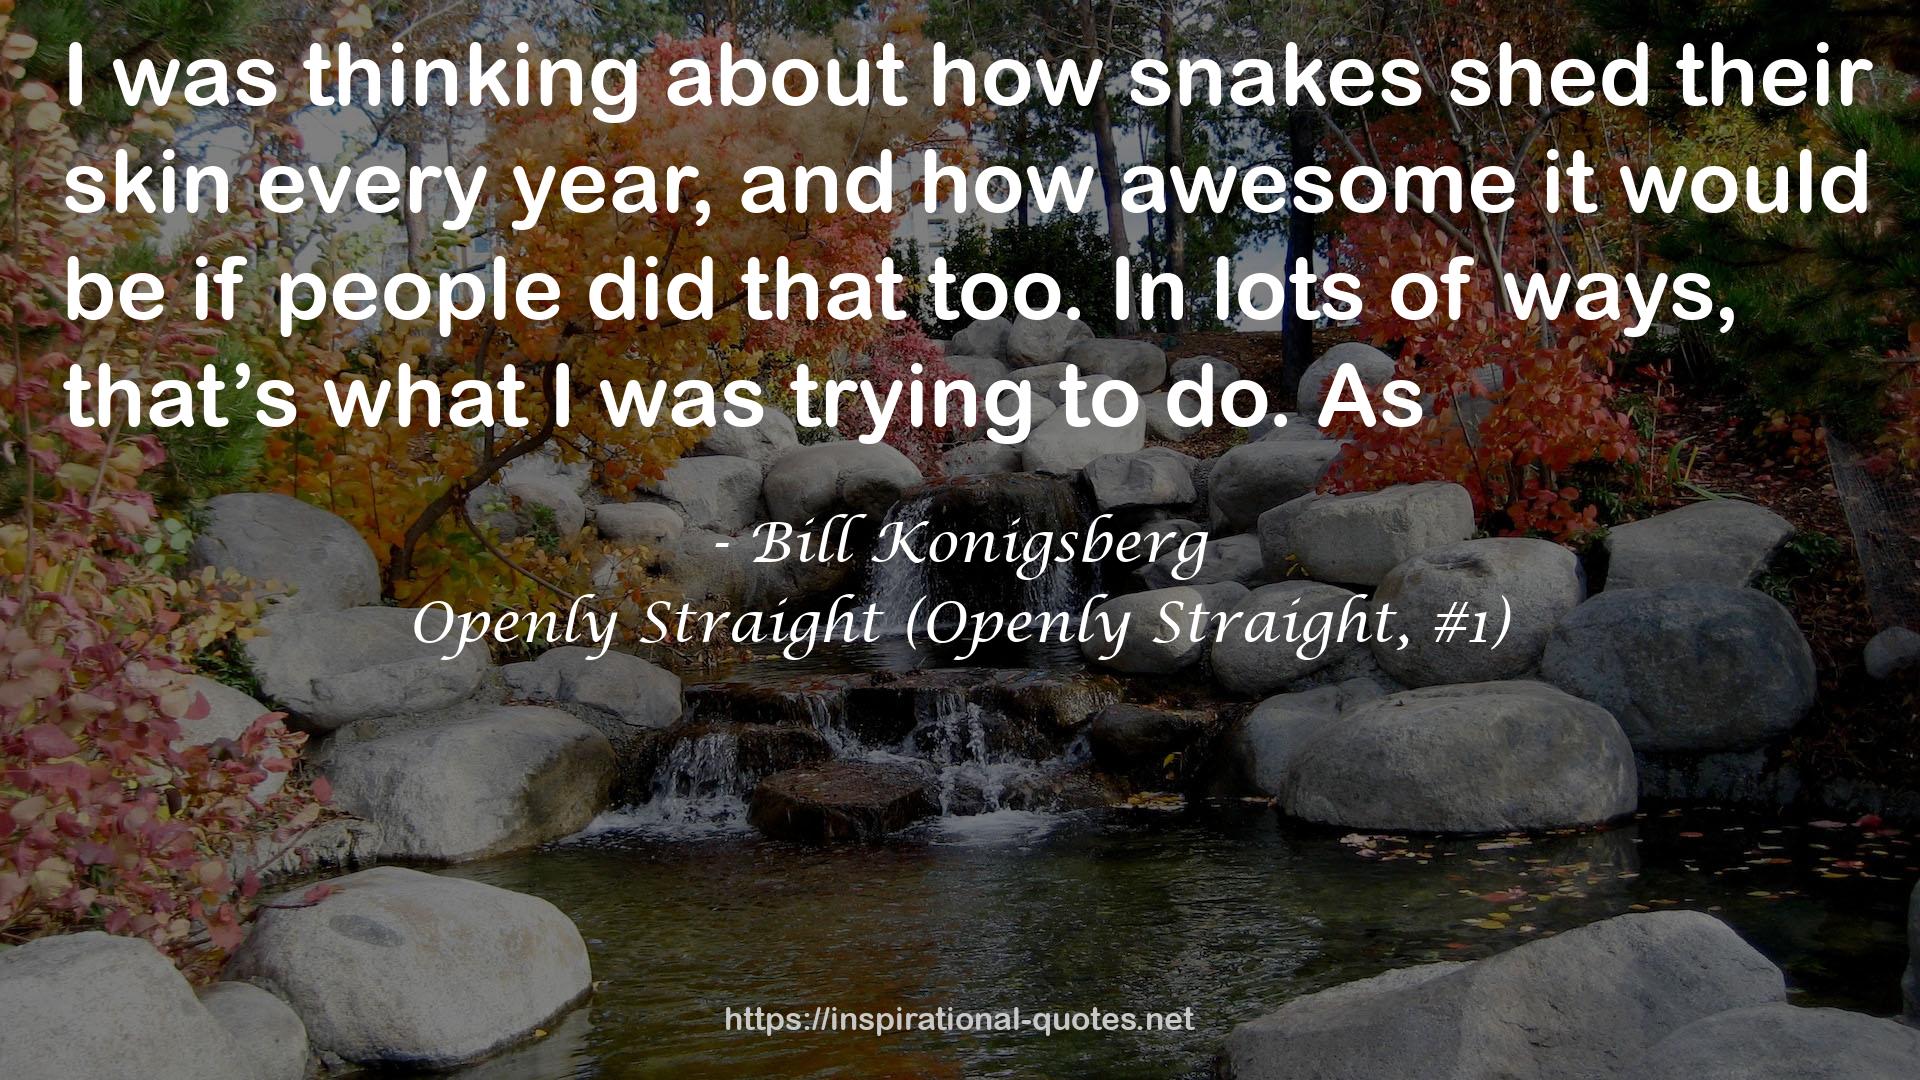 Openly Straight (Openly Straight, #1) QUOTES